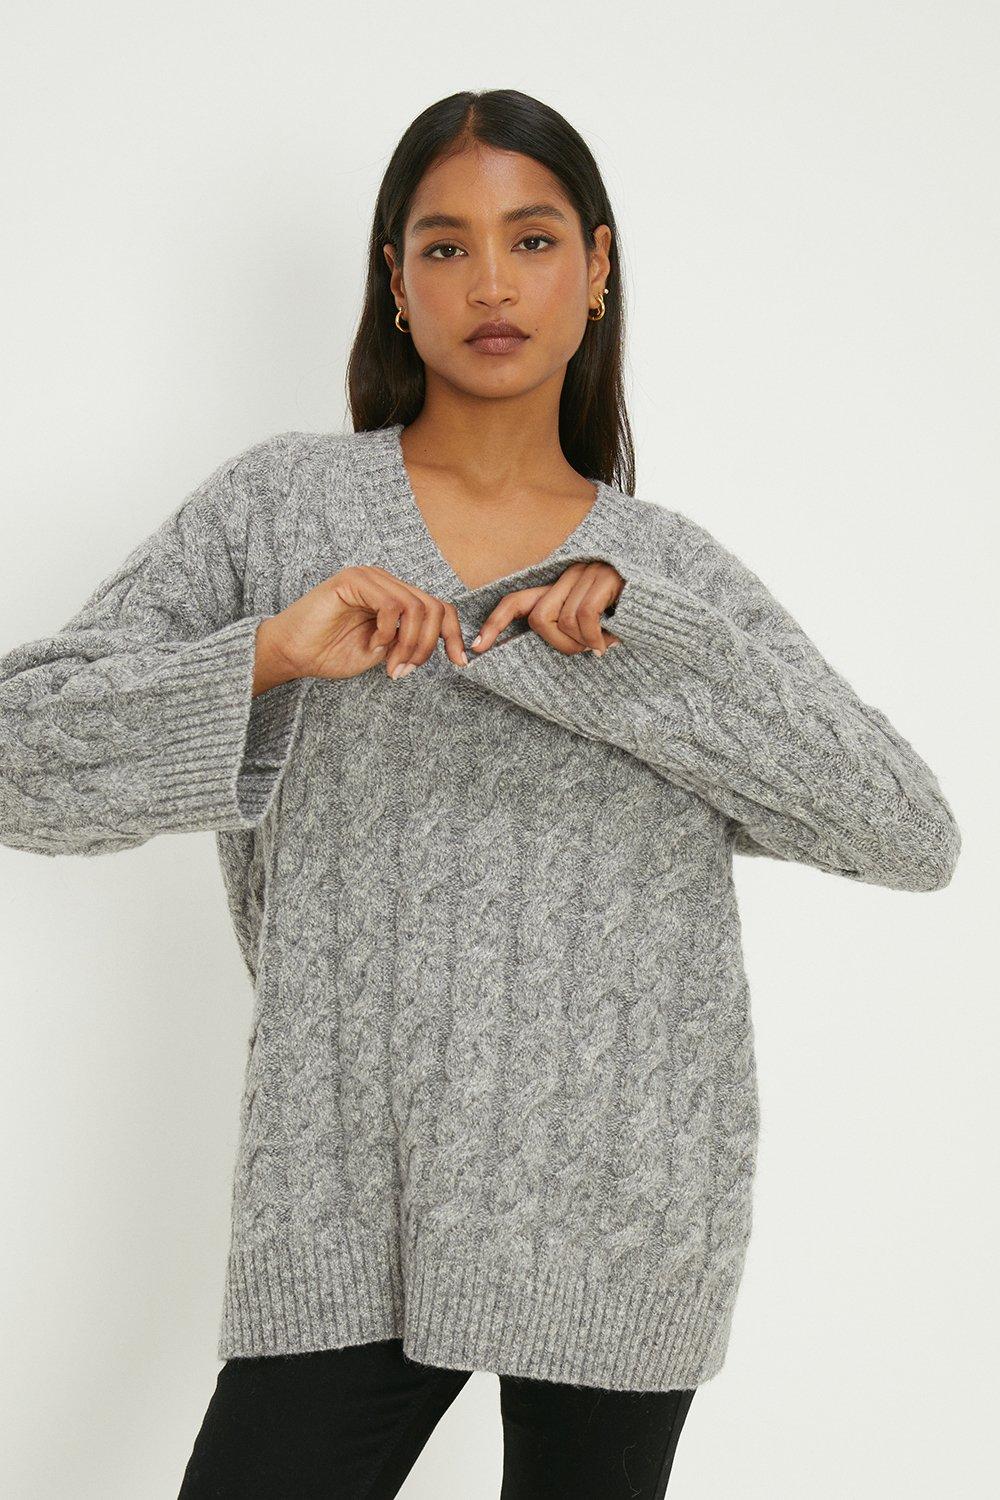 Women’s V-Neck Chunky Cable Tunic - grey - XL